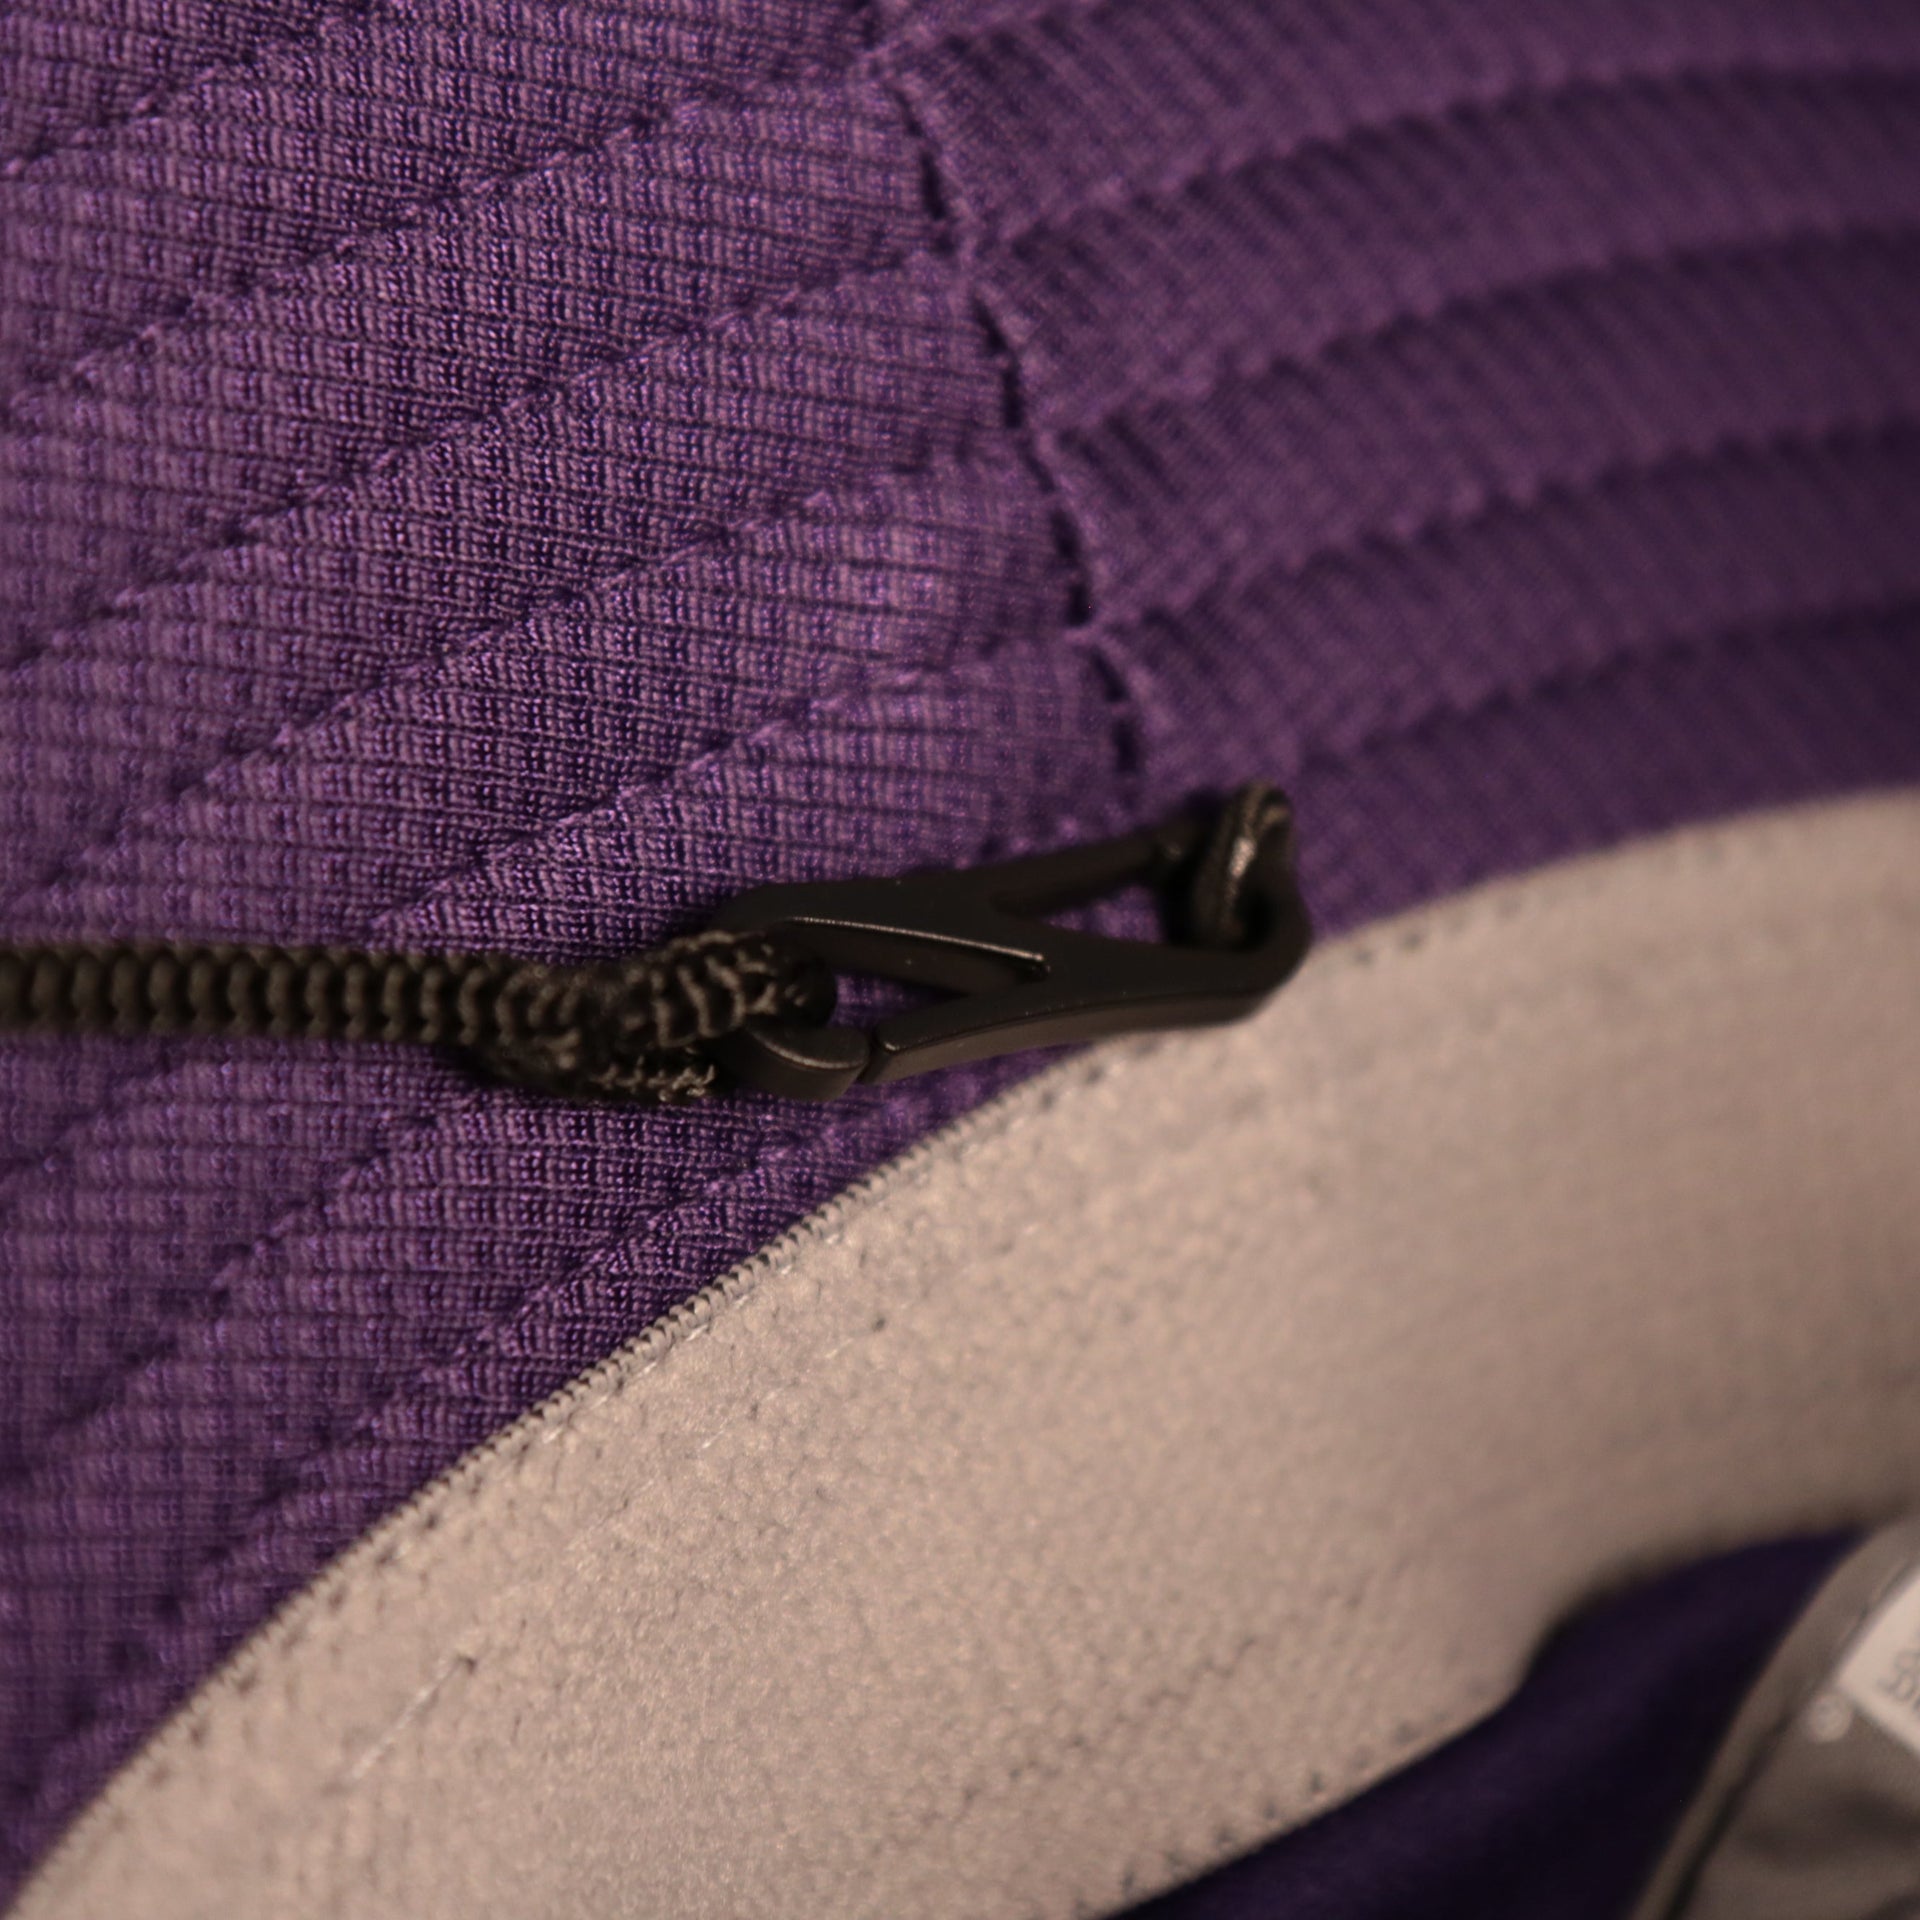 The adjustable drawstring of the Los Angeles Lakers purple fishing hat by New Era.